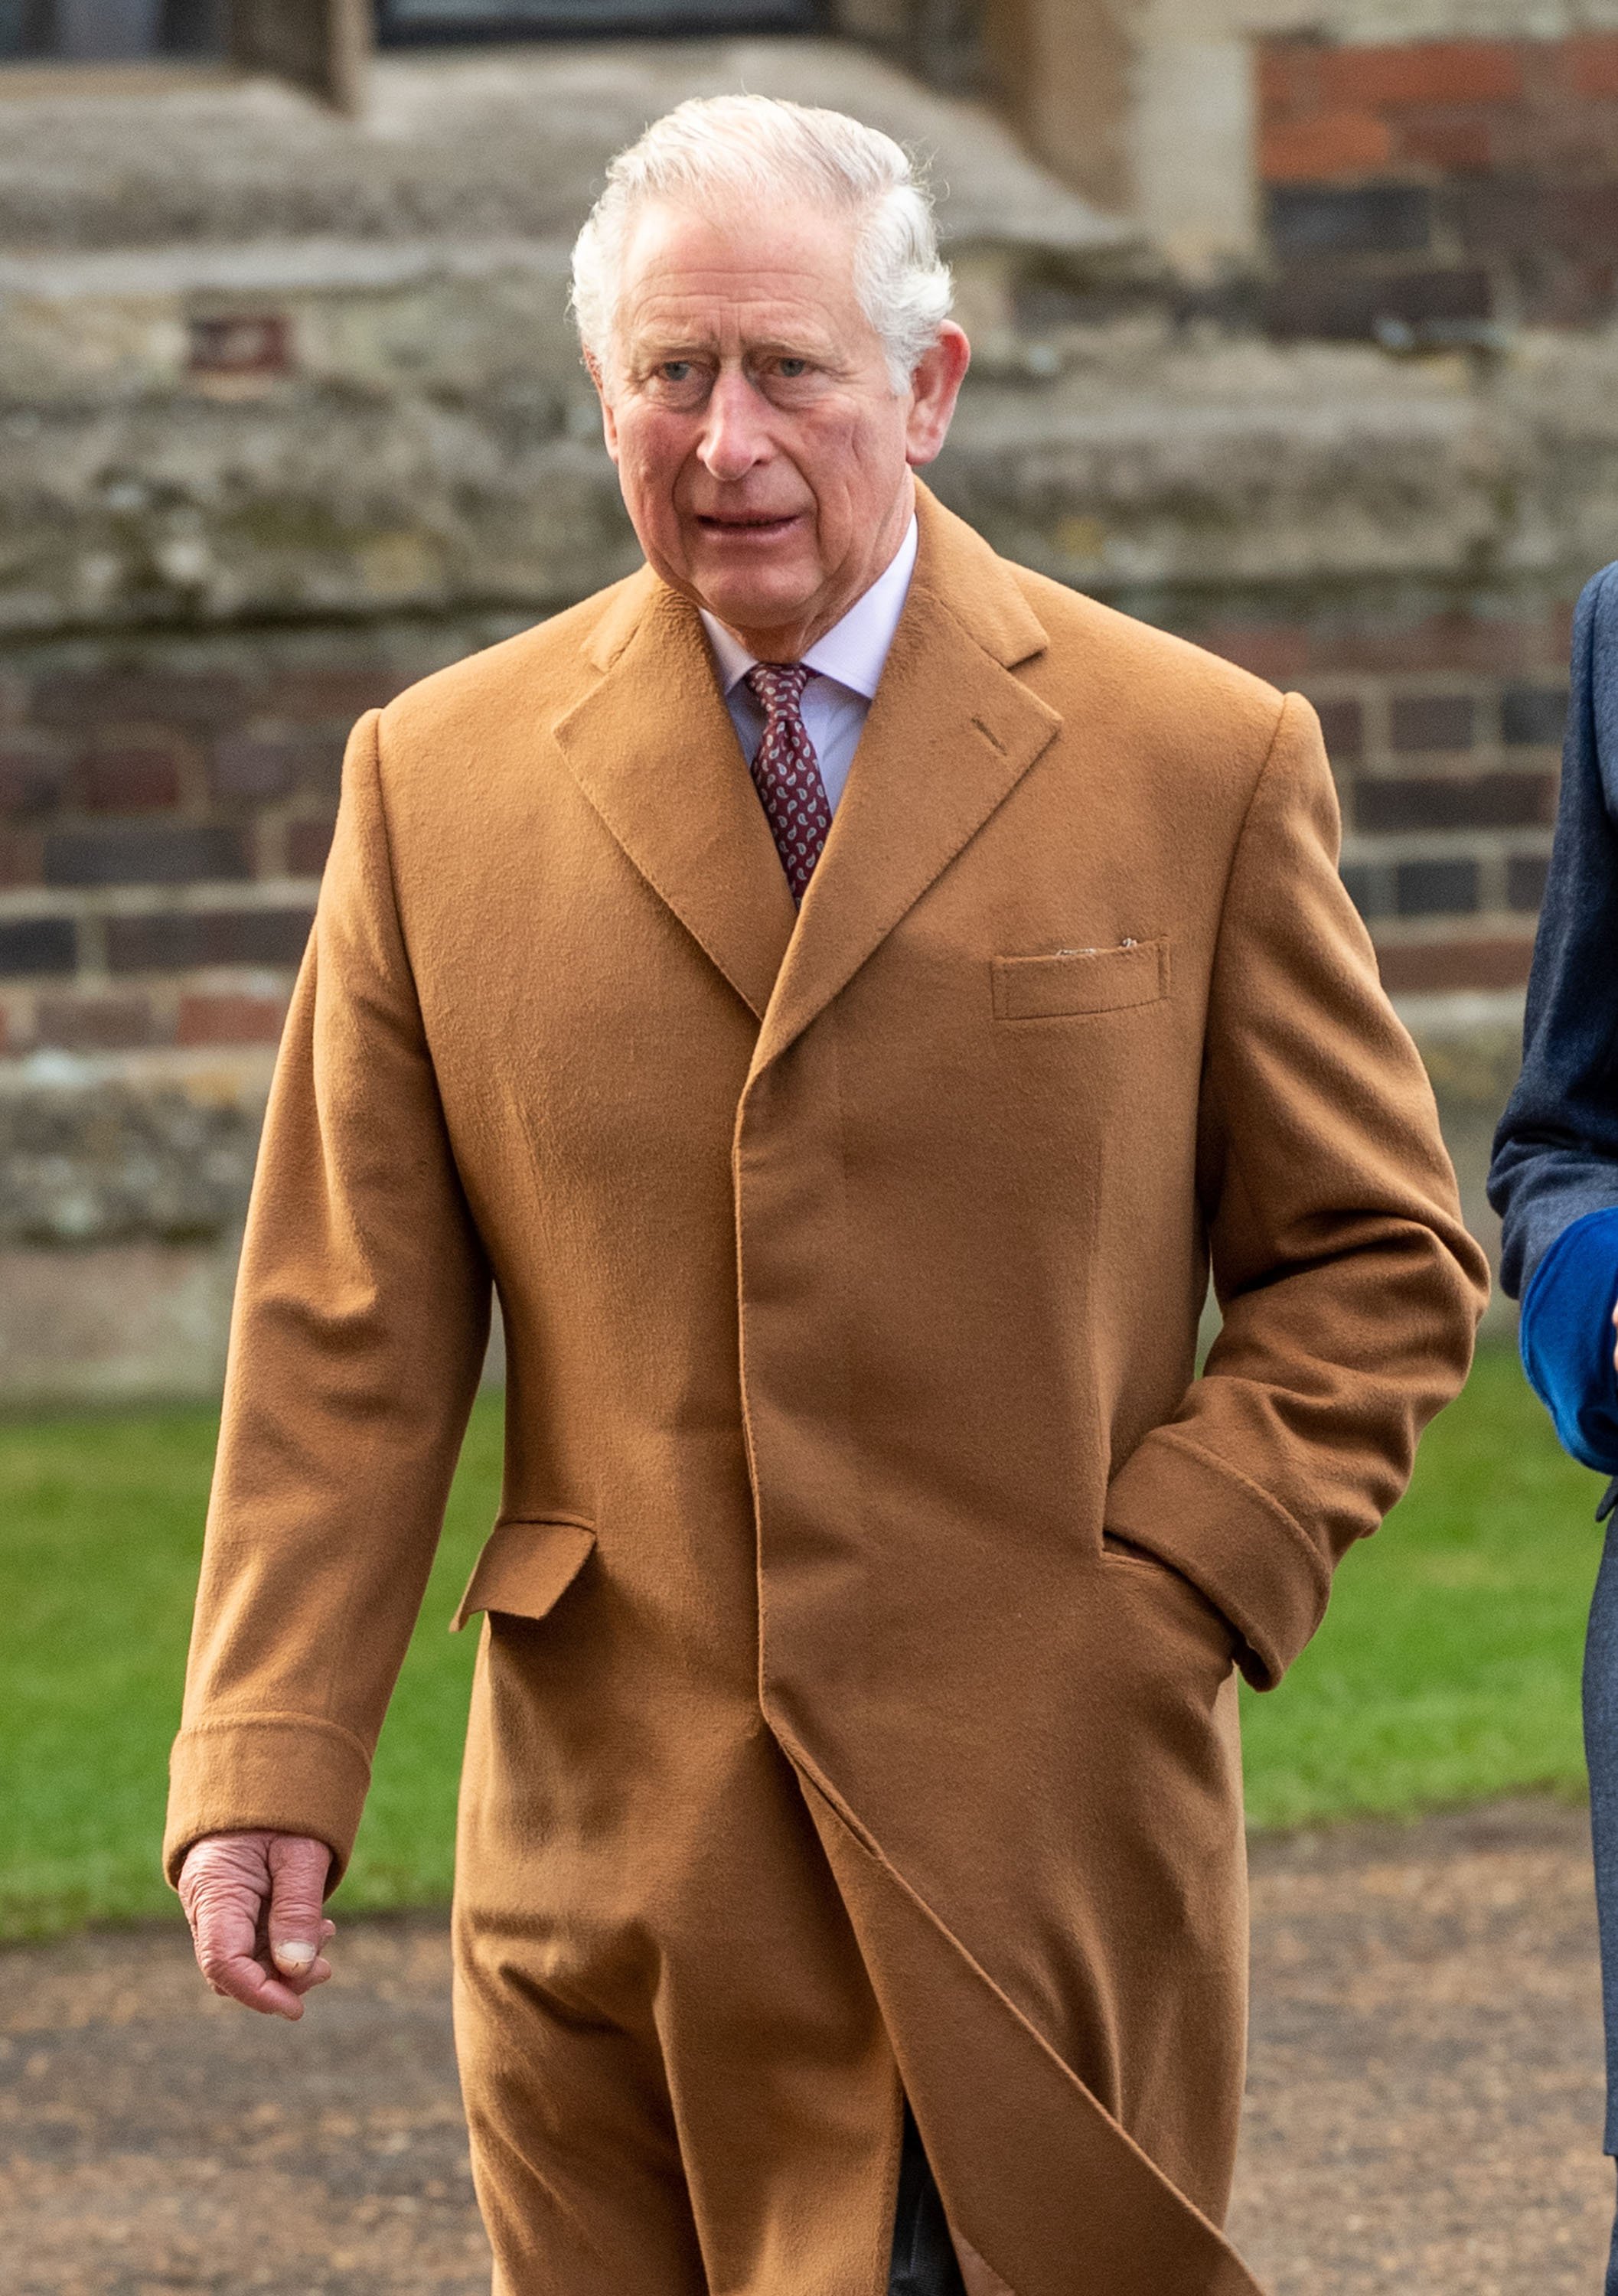 Prince Charles, Prince of Wales during a visit to Ely Cathedral on November 27, 2018 in Ely, England | Source: Getty Images